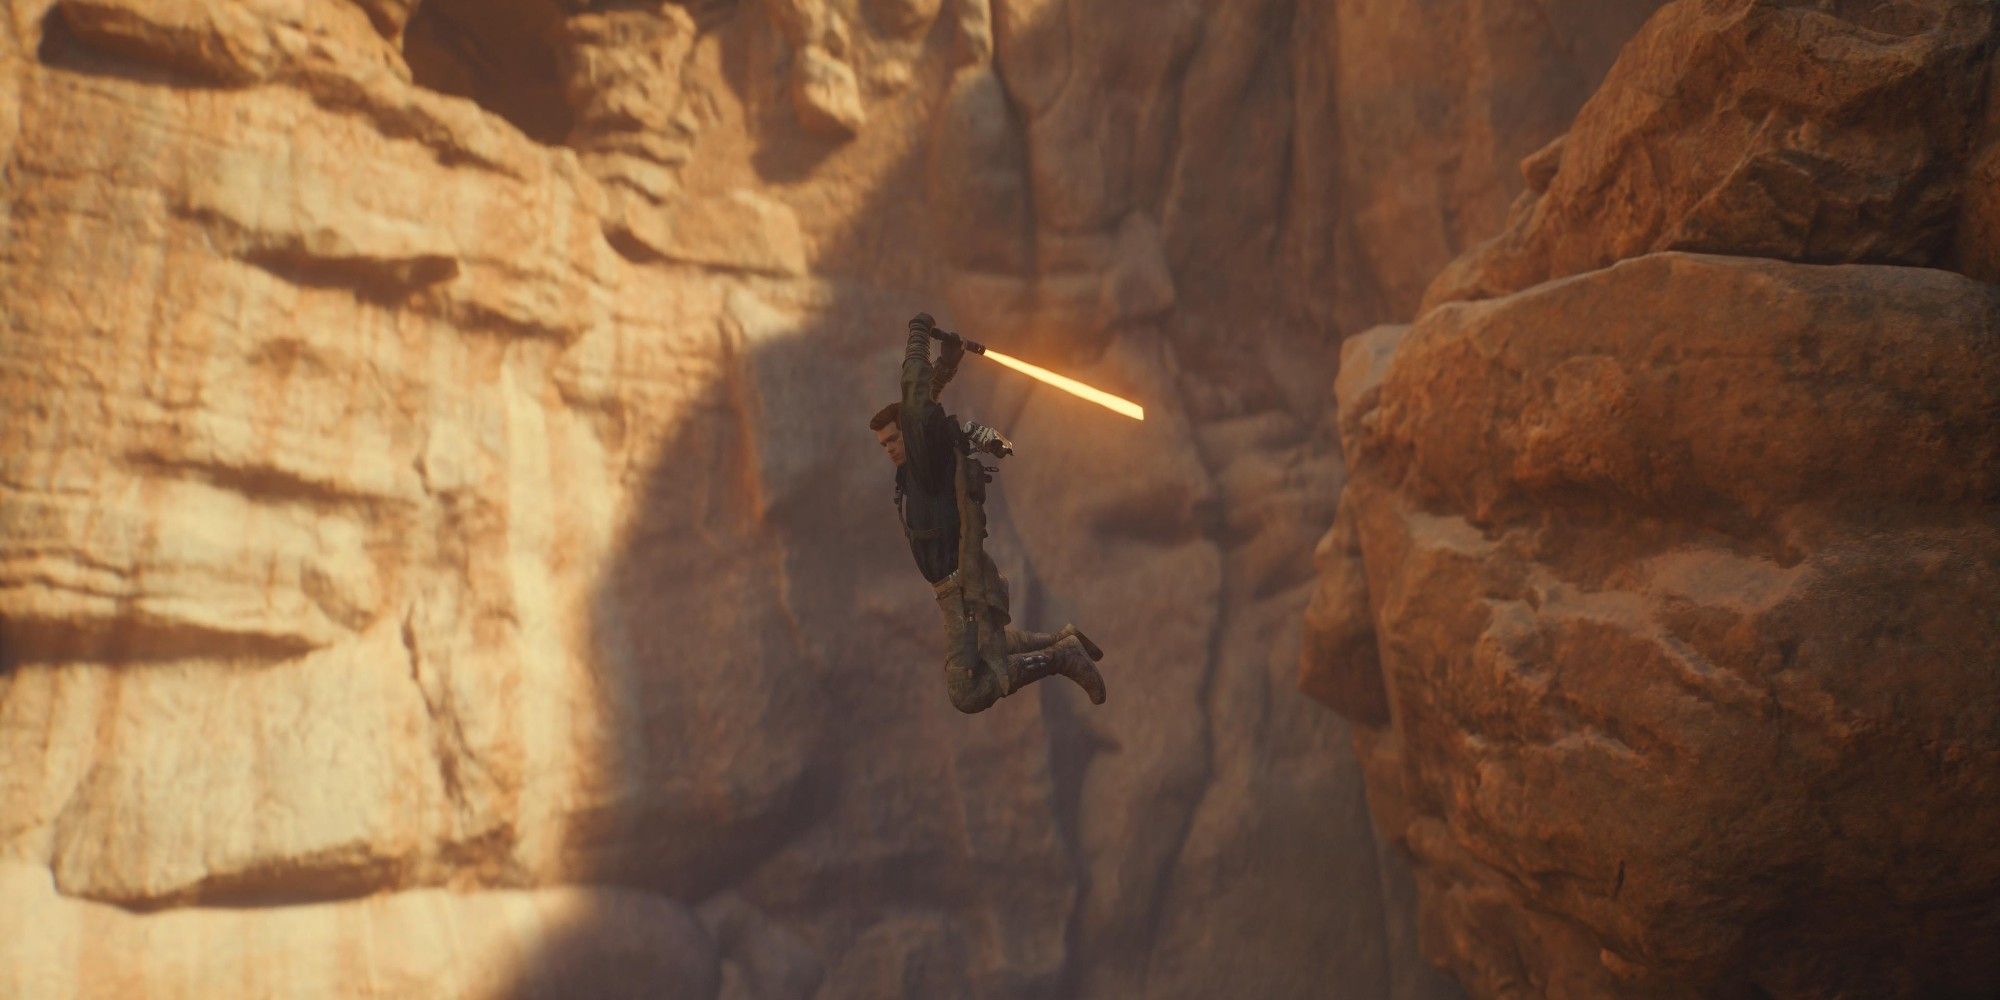 cal performing a jump attack with his orange lightsaber